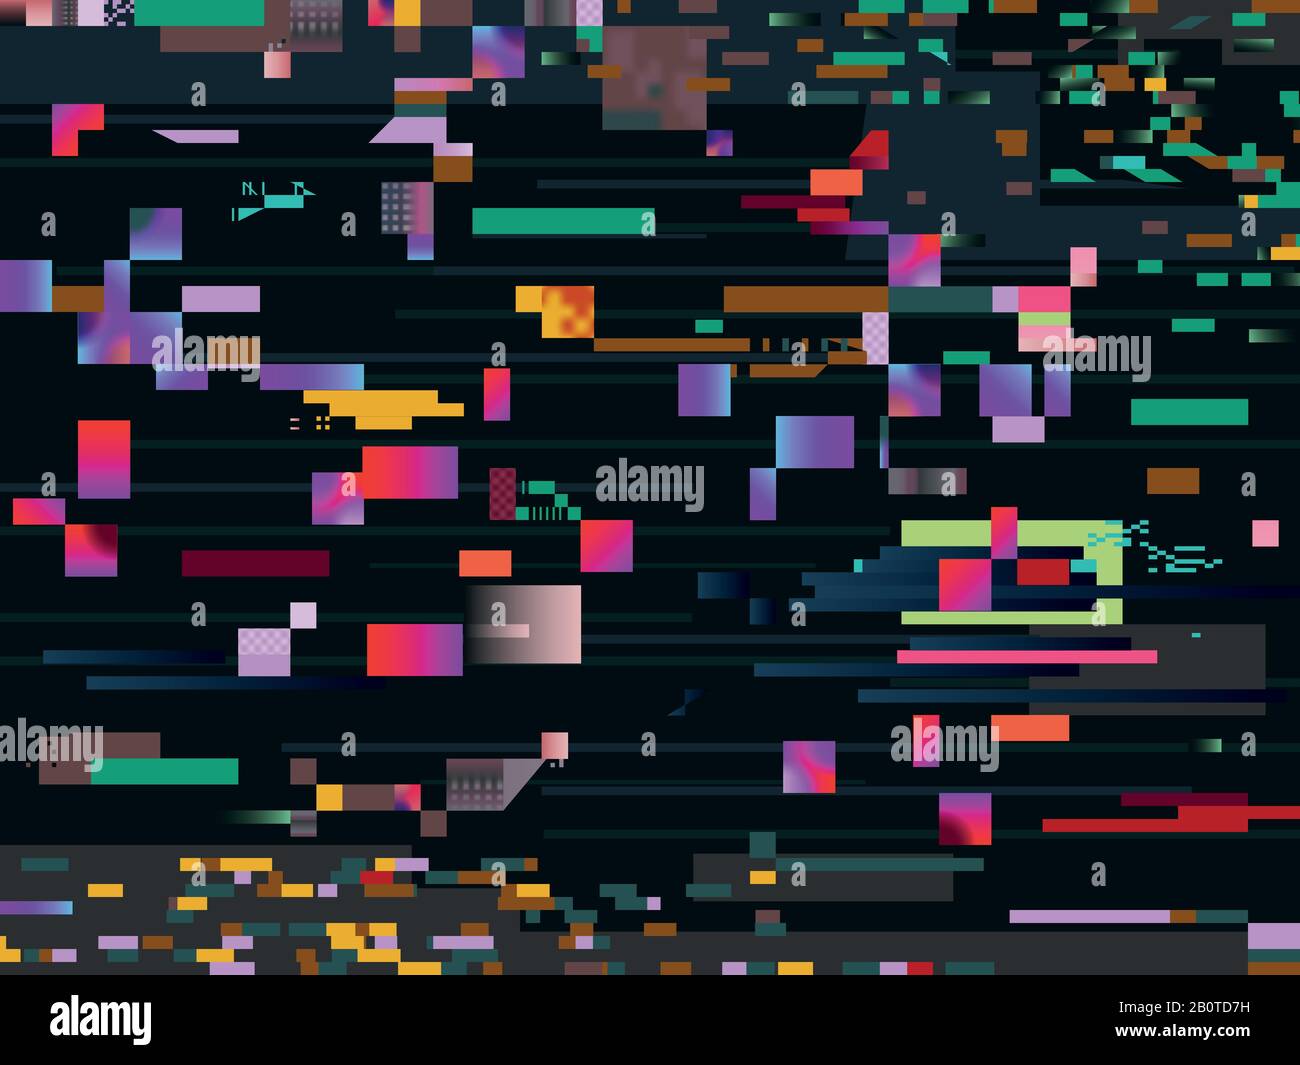 Glitch art finds meaning in tech failure - Kill Screen - Previously